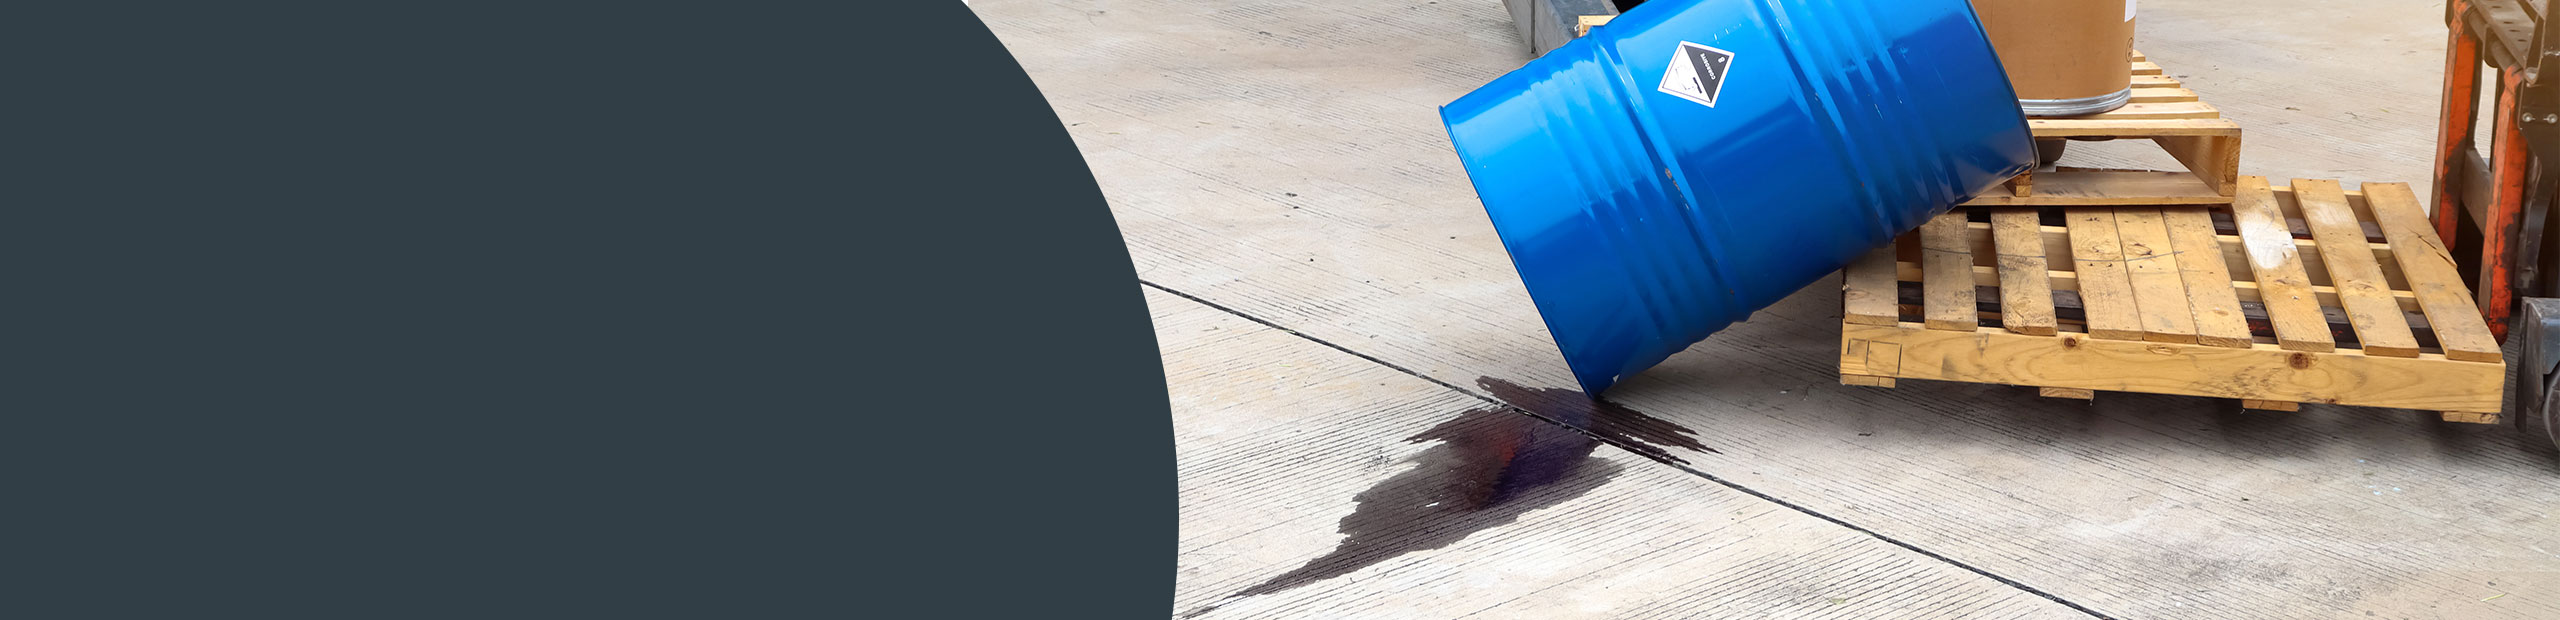 Chemical Spill Cleaning - Buckinghamshire